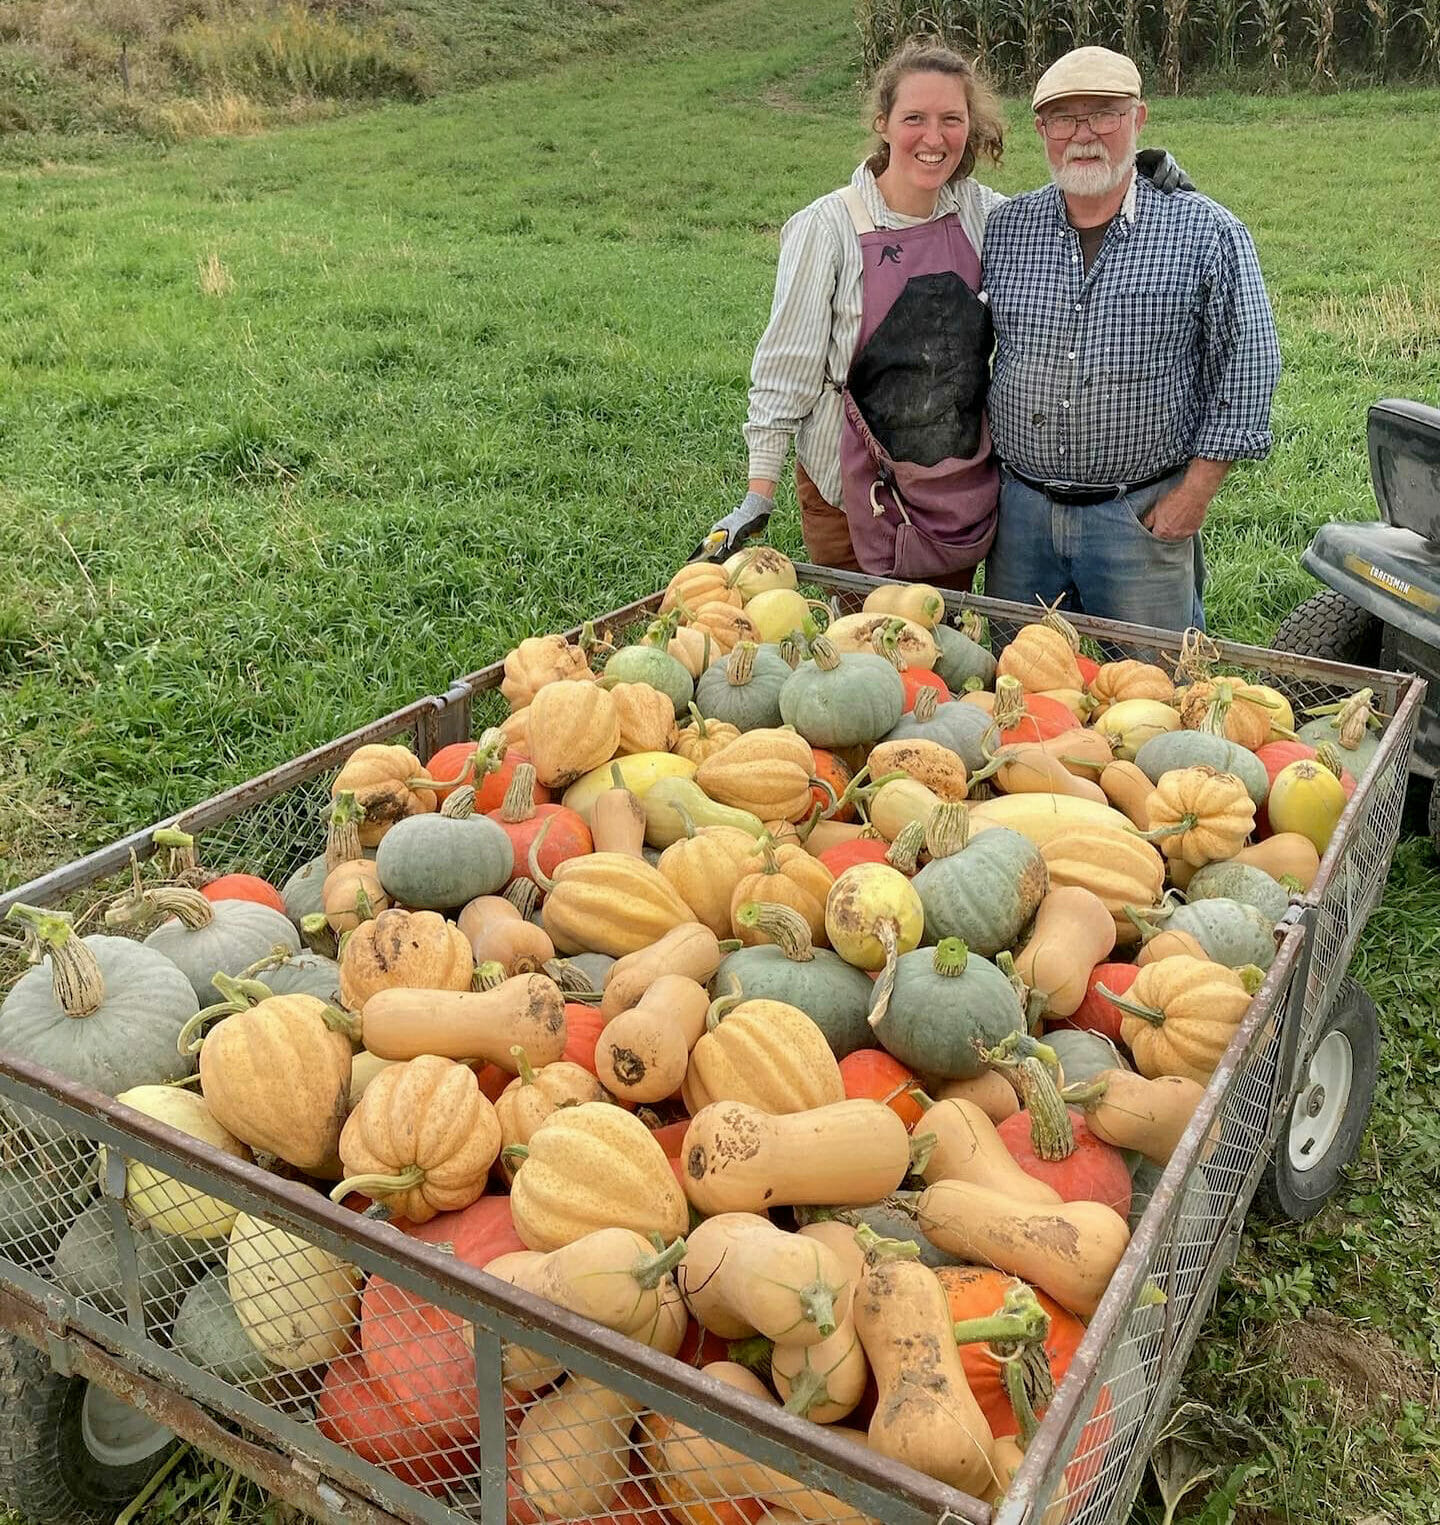 Natasha Hegmann and Paul Young pose with a wagon full of squash they grew for the Iowa Local Food Purchasing Assistance Program. 